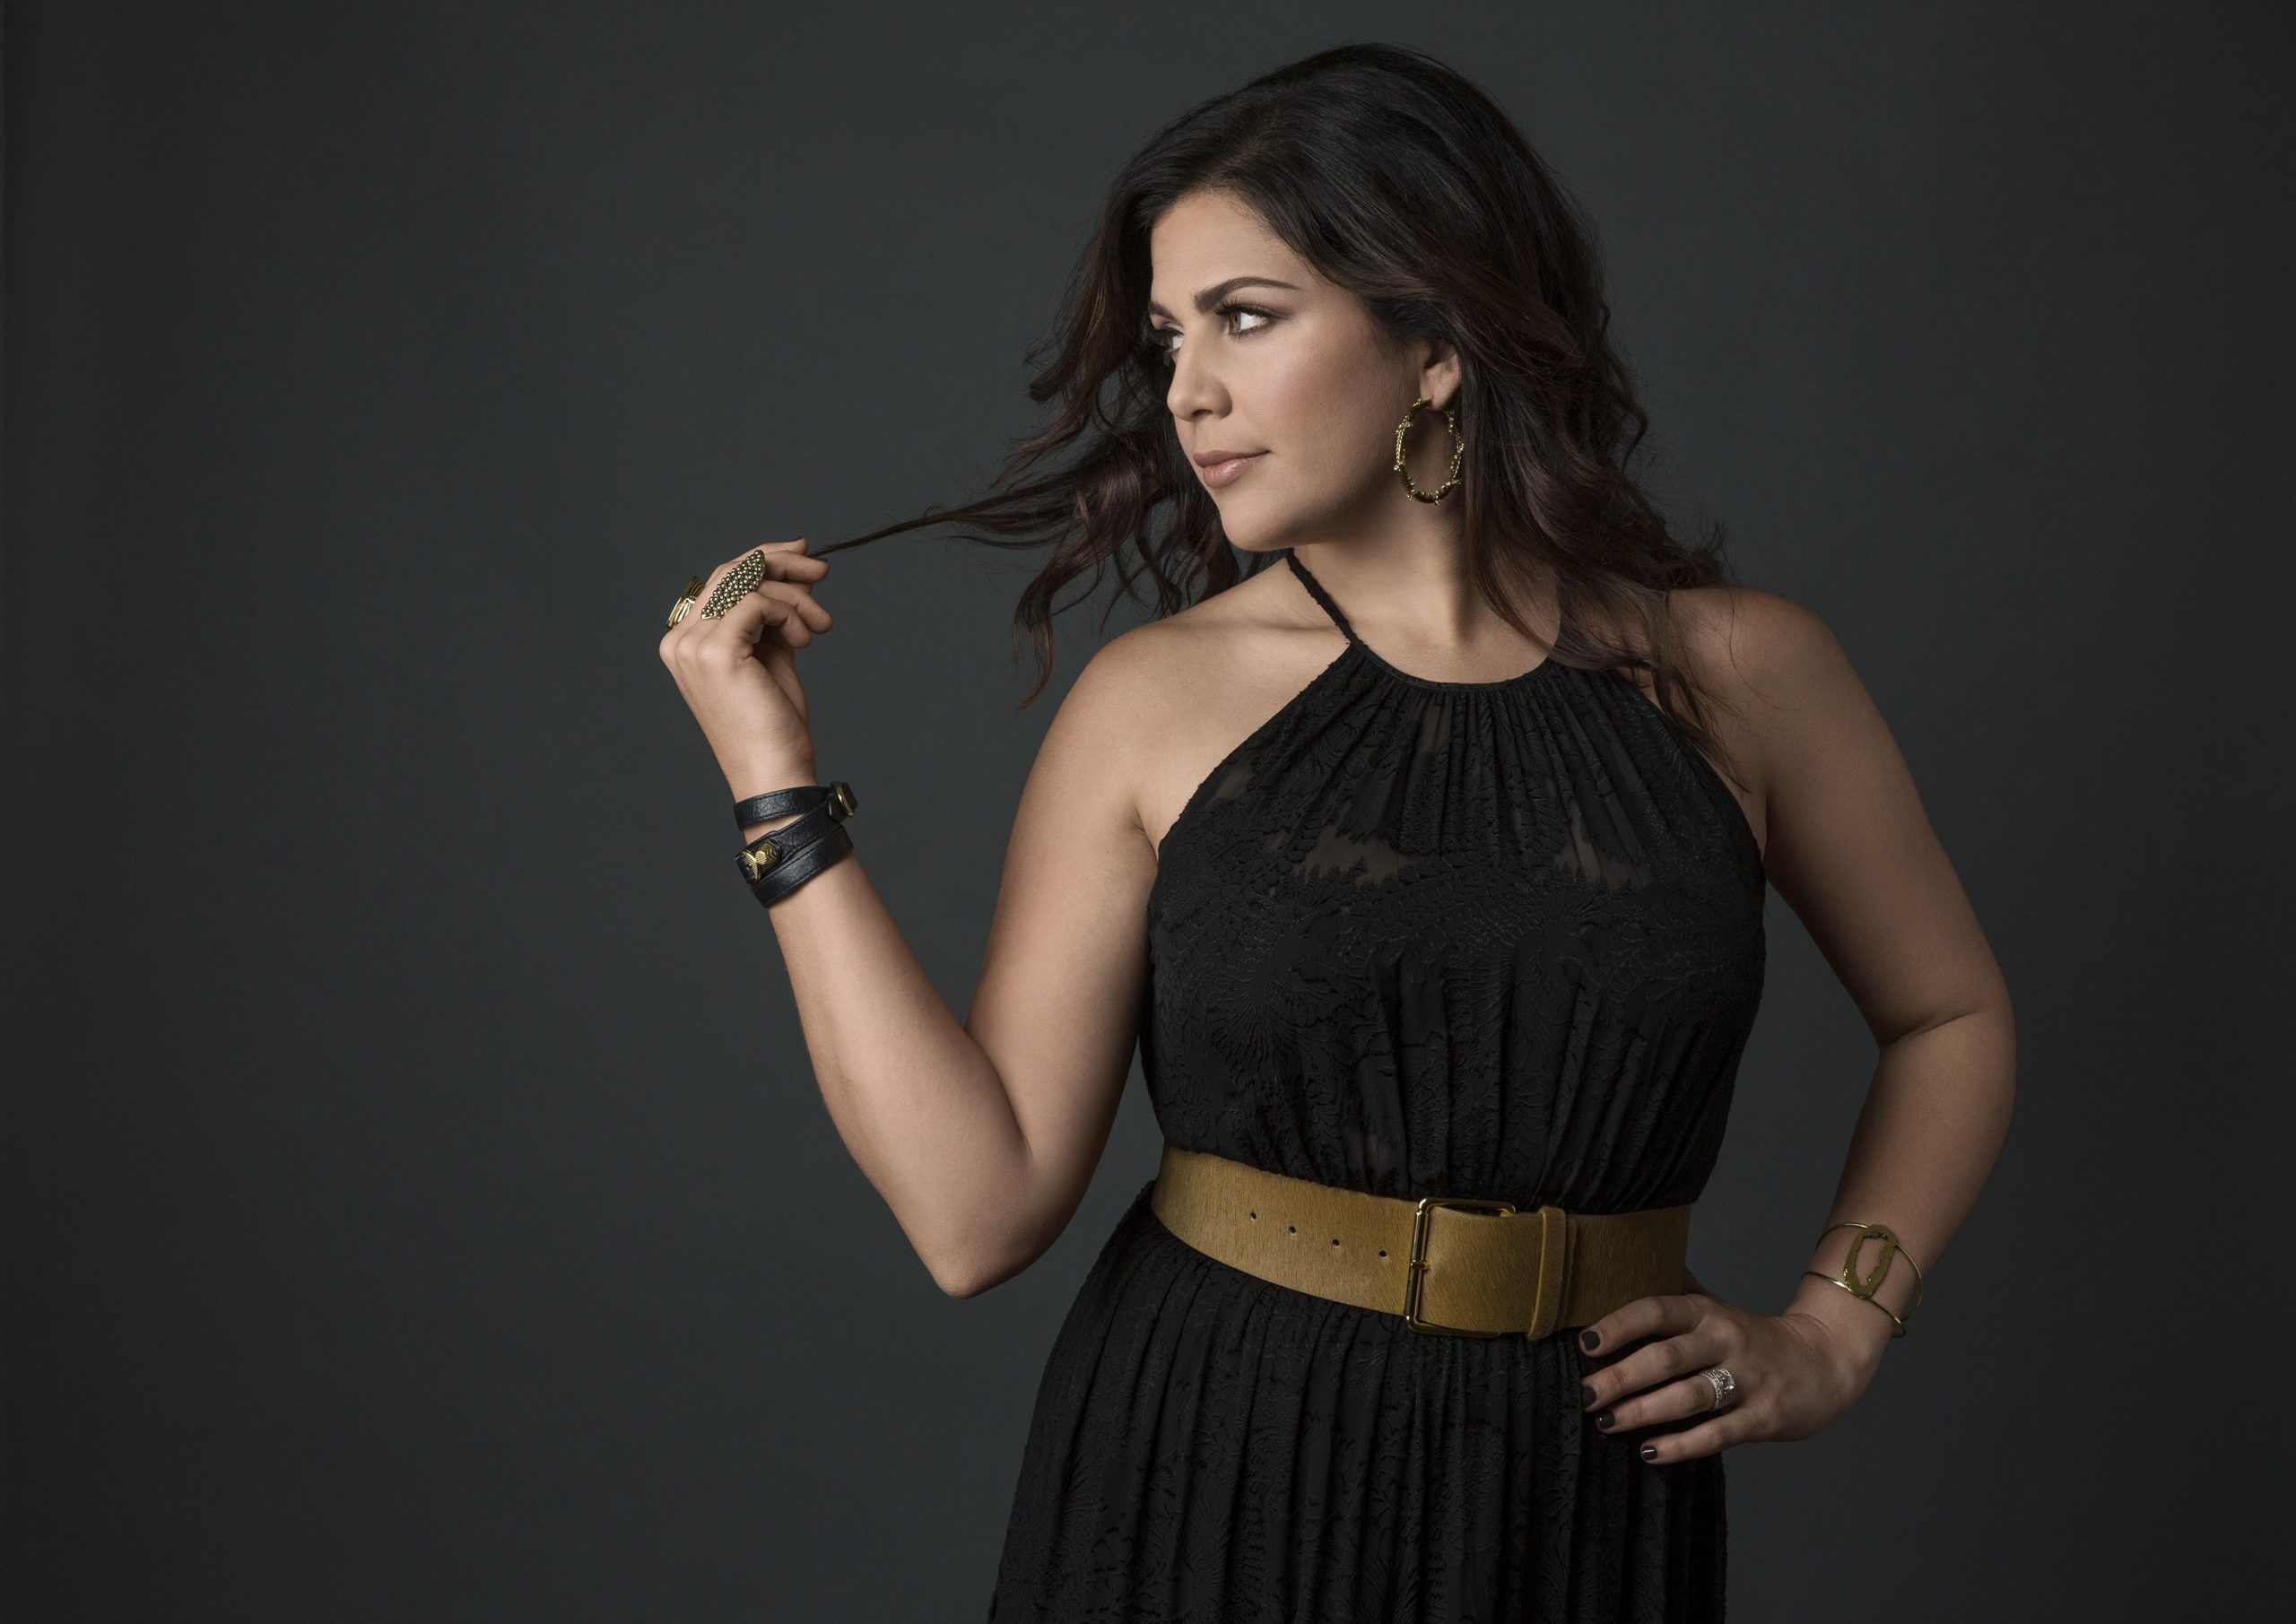 HILLARY SCOTT & THE SCOTT FAMILY’S “THY WILL” TOPS THREE RADIO CHARTS THIS WEEK INCLUDING THE NATIONAL CHRISTIAN AUDIENCE, BILLBOARD’S CHRISTIAN DIGITAL SONGS AND BILLBOARD’S HOT CHRISTIAN SONGS CHARTS